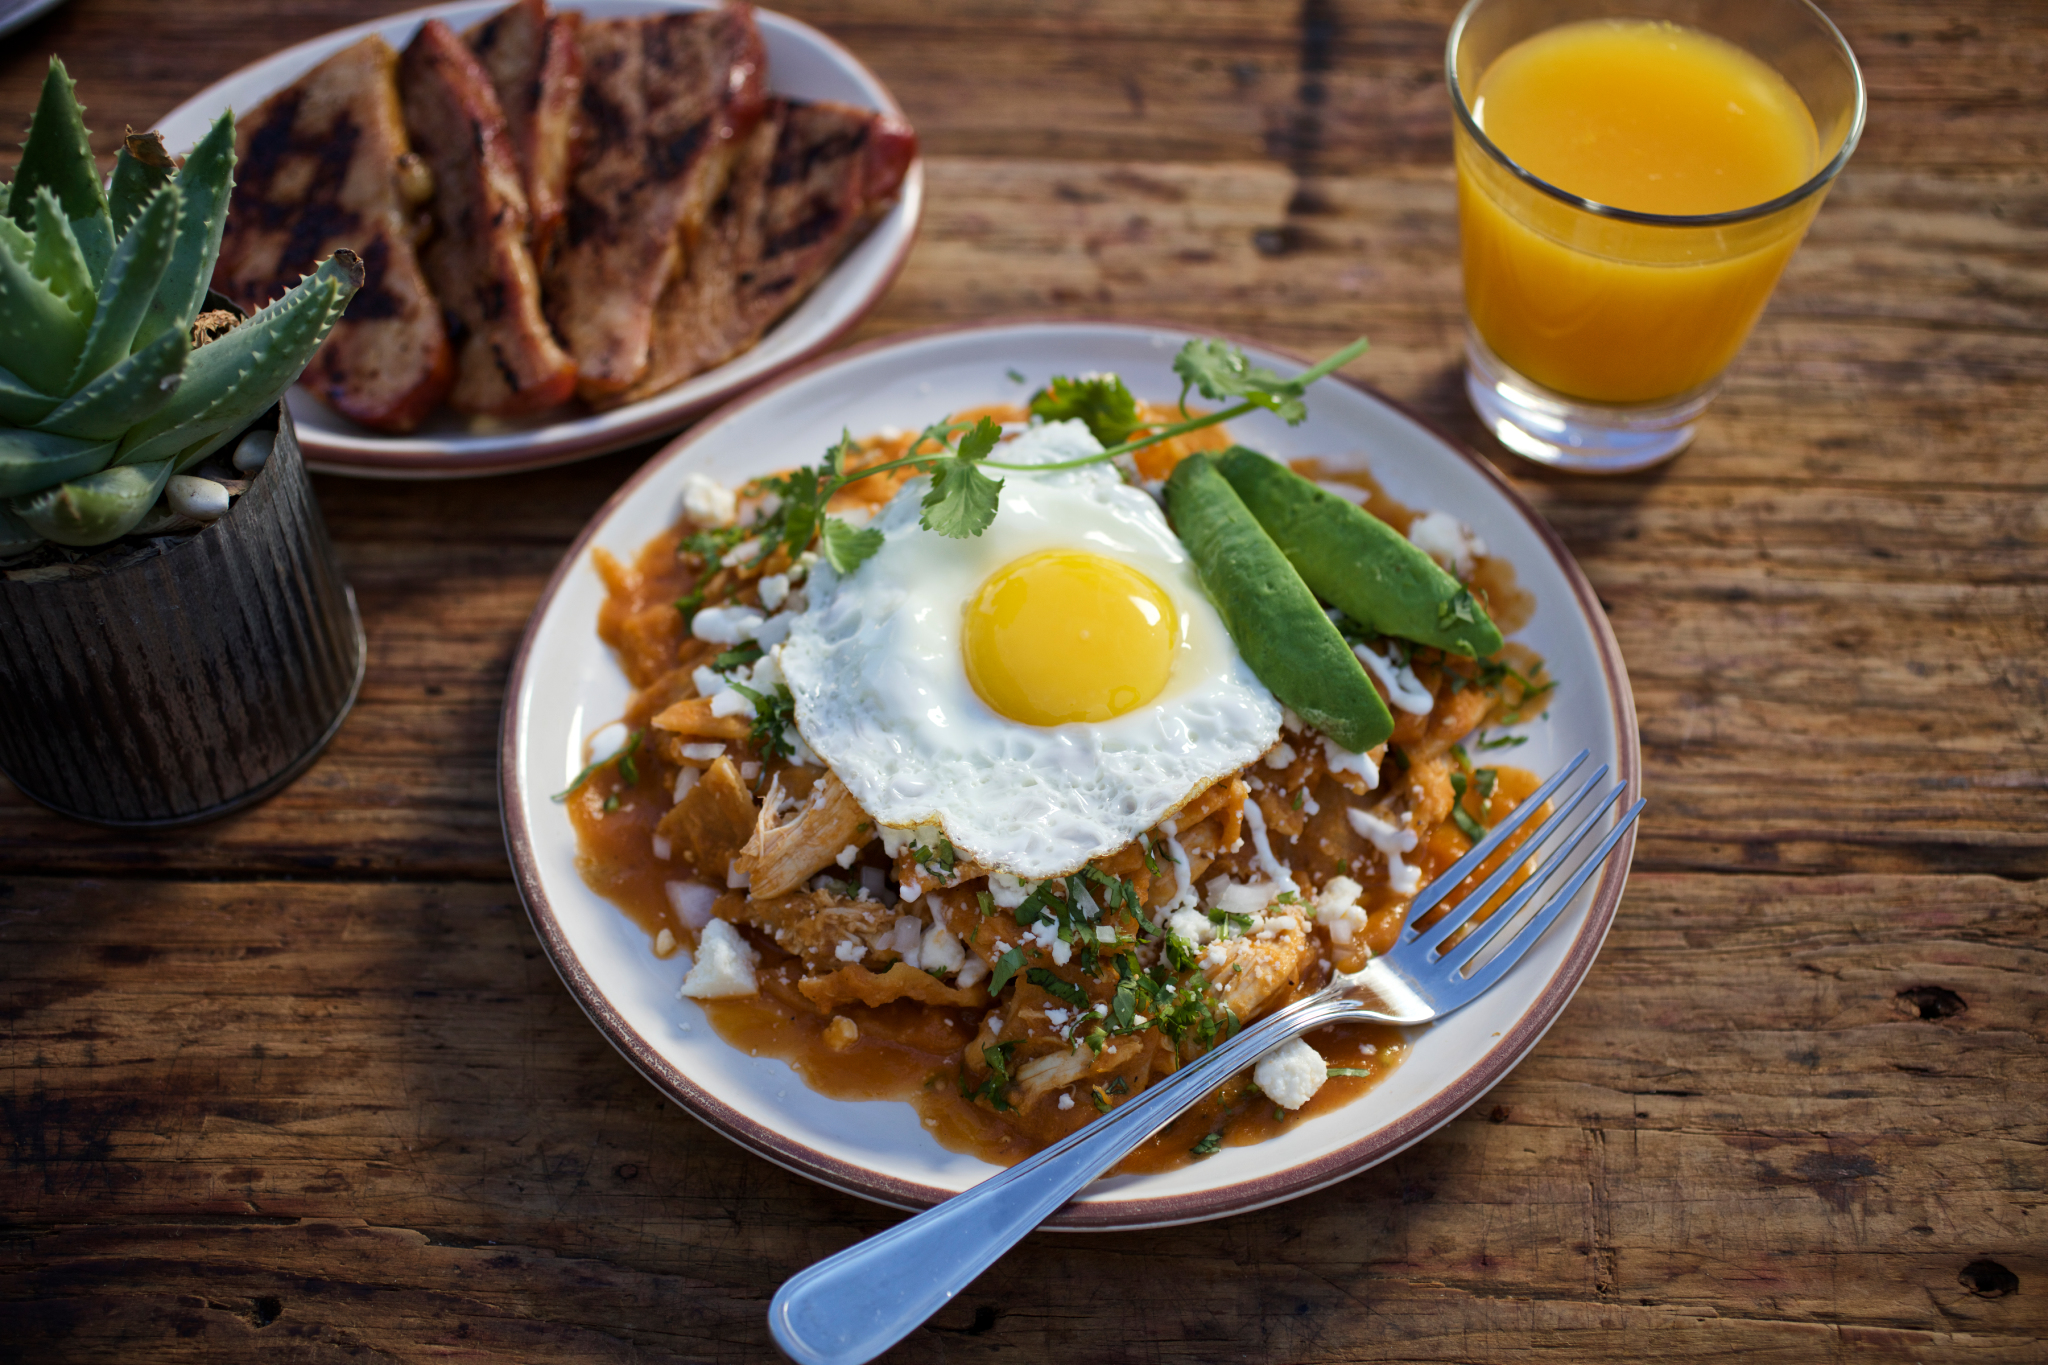 Here are 23 of the best brunch, breakfast spots in Houston suburbs